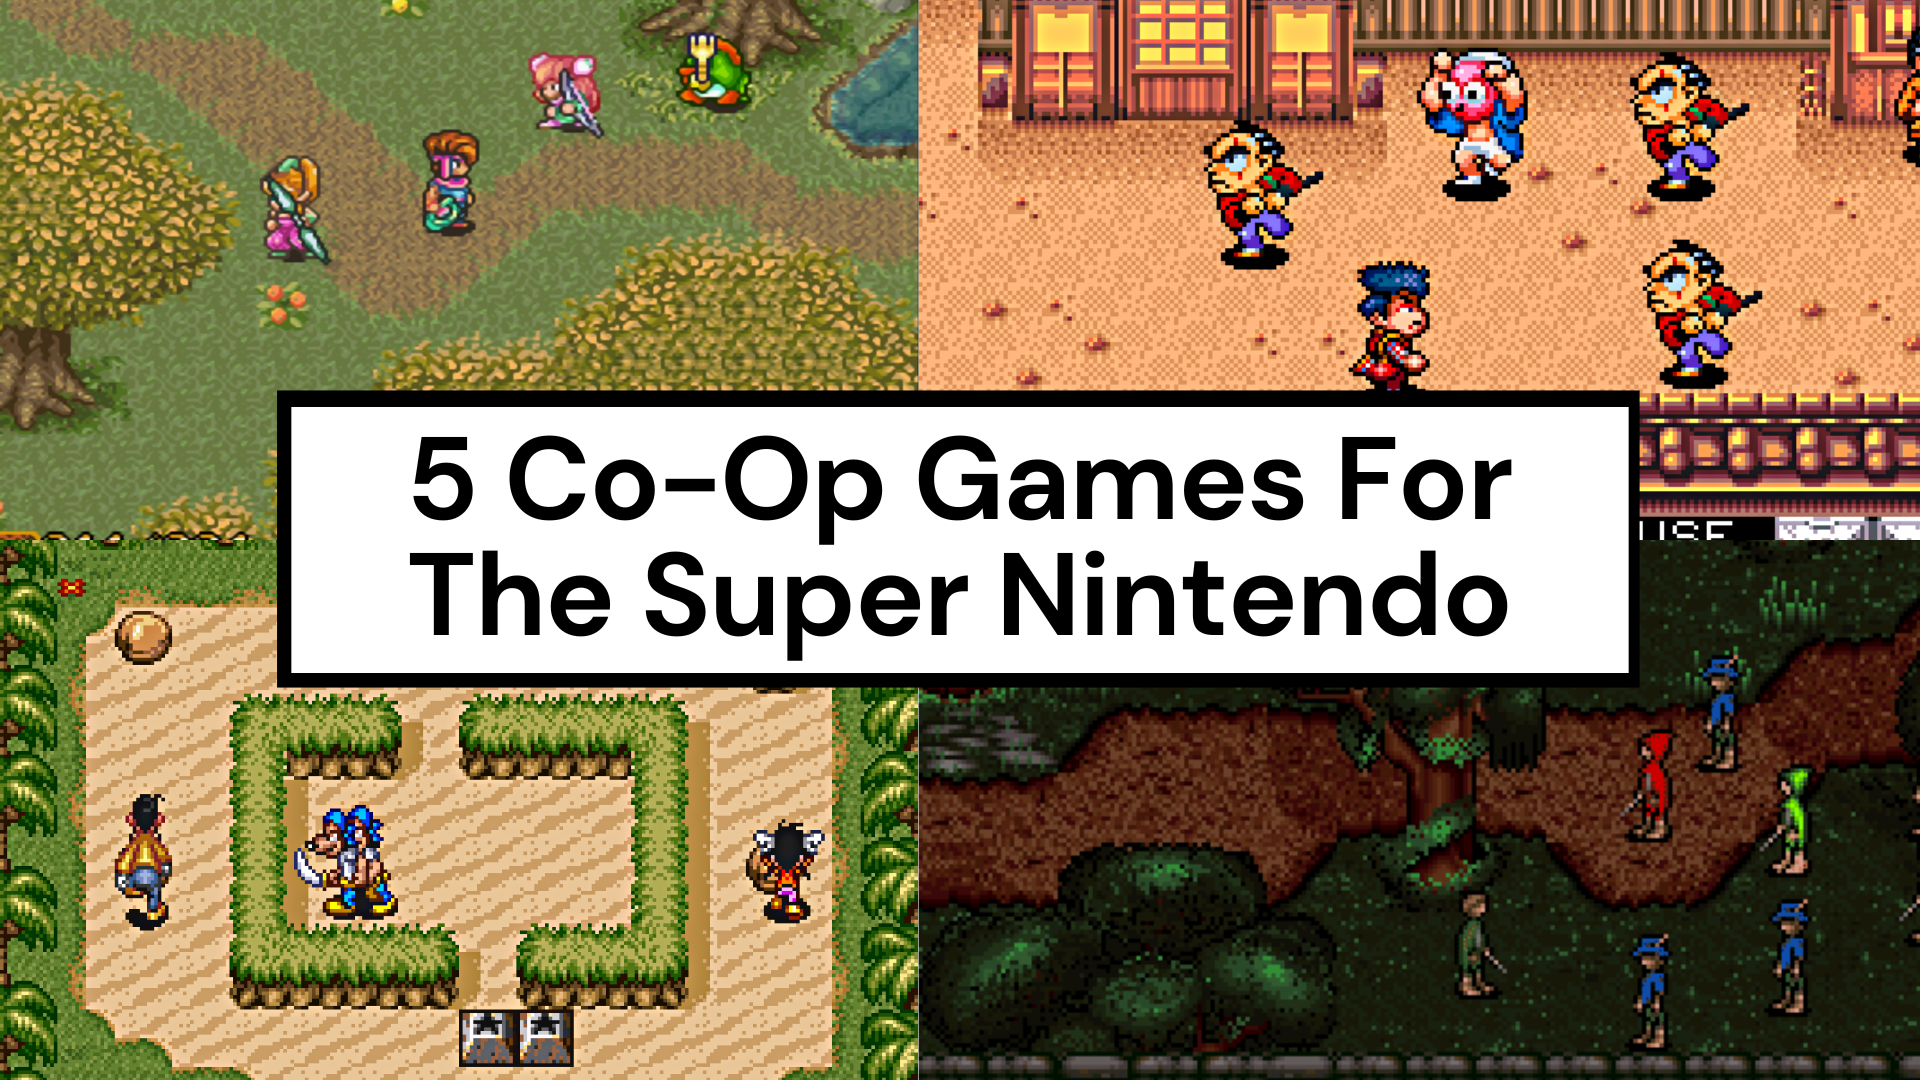 5 Co-Op Super Nintendo Games To Play With Friends